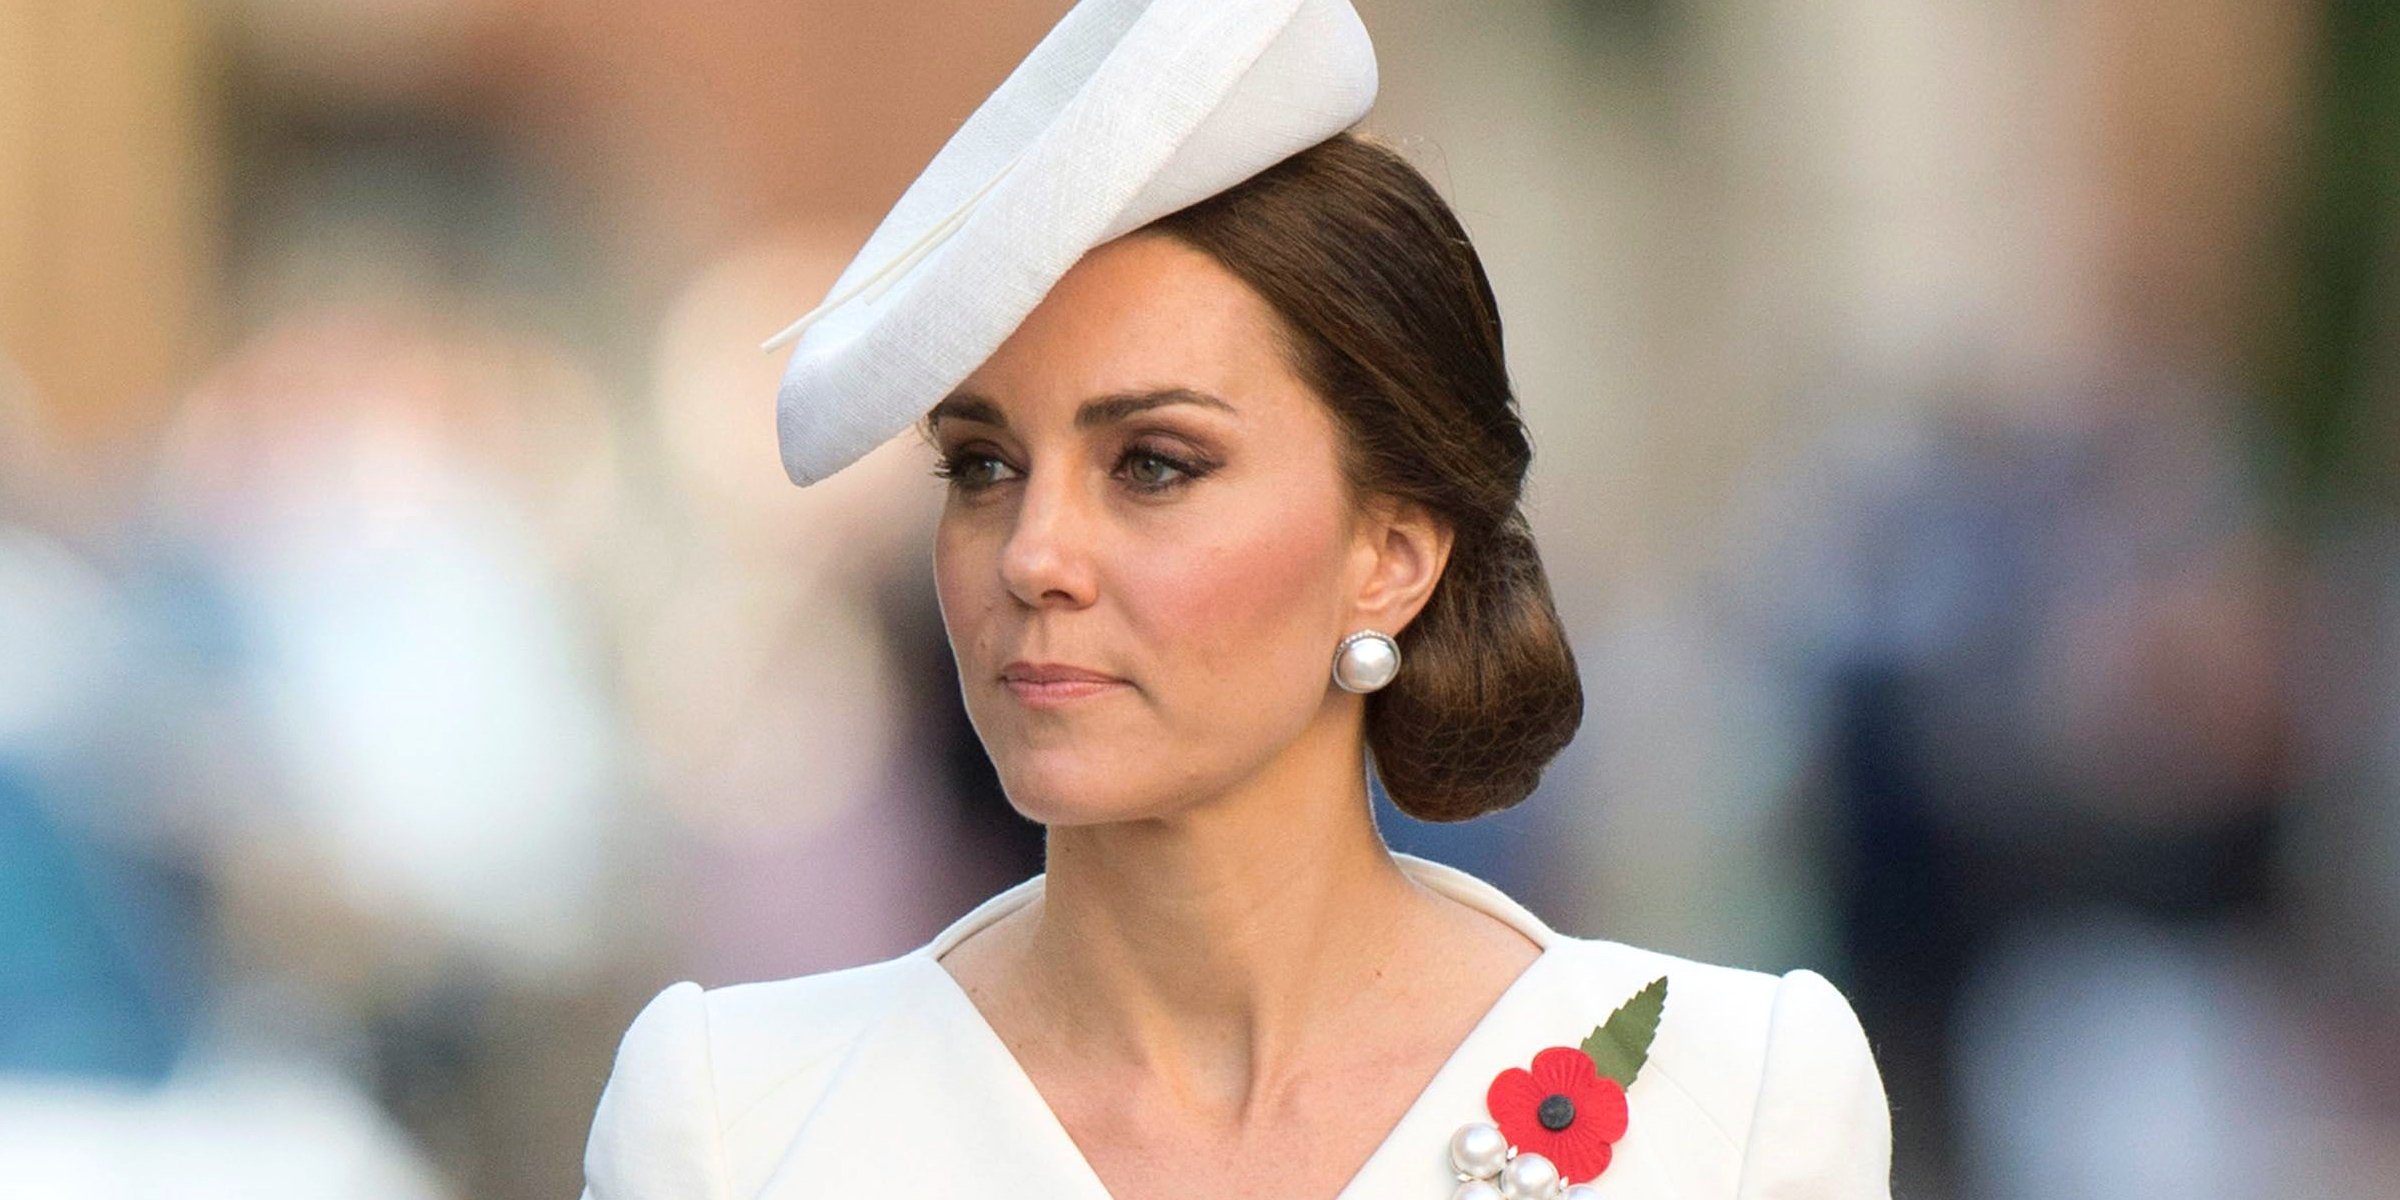 Can Kate Middleton Ever Become Queen? Her Place in Line to the Throne ...